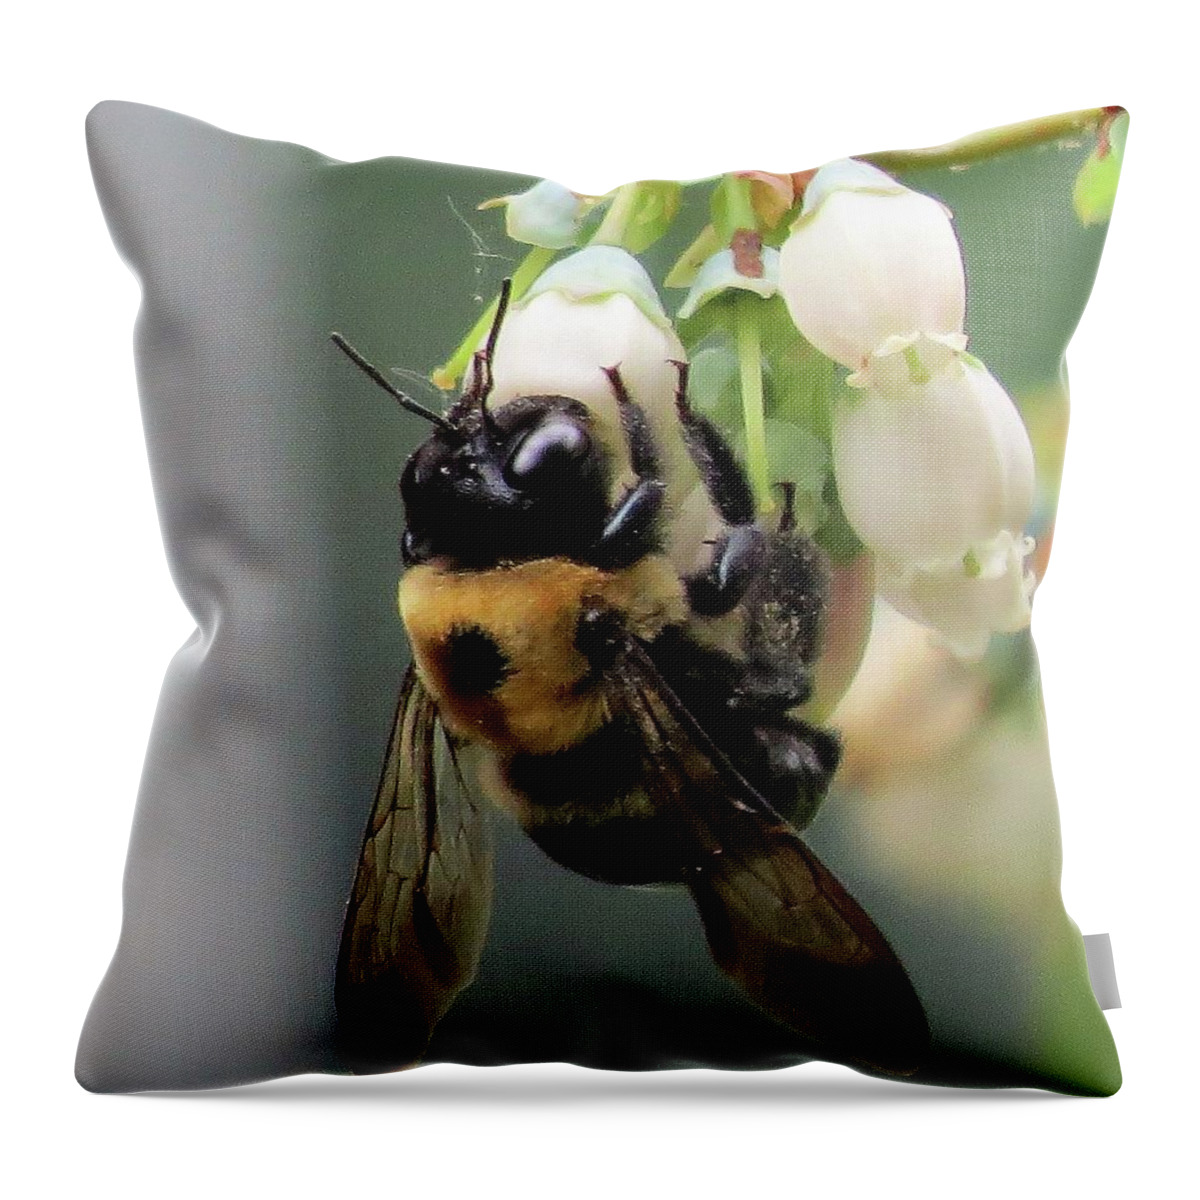 Bees Throw Pillow featuring the photograph Busy Bee on Blueberry Blossom by Linda Stern